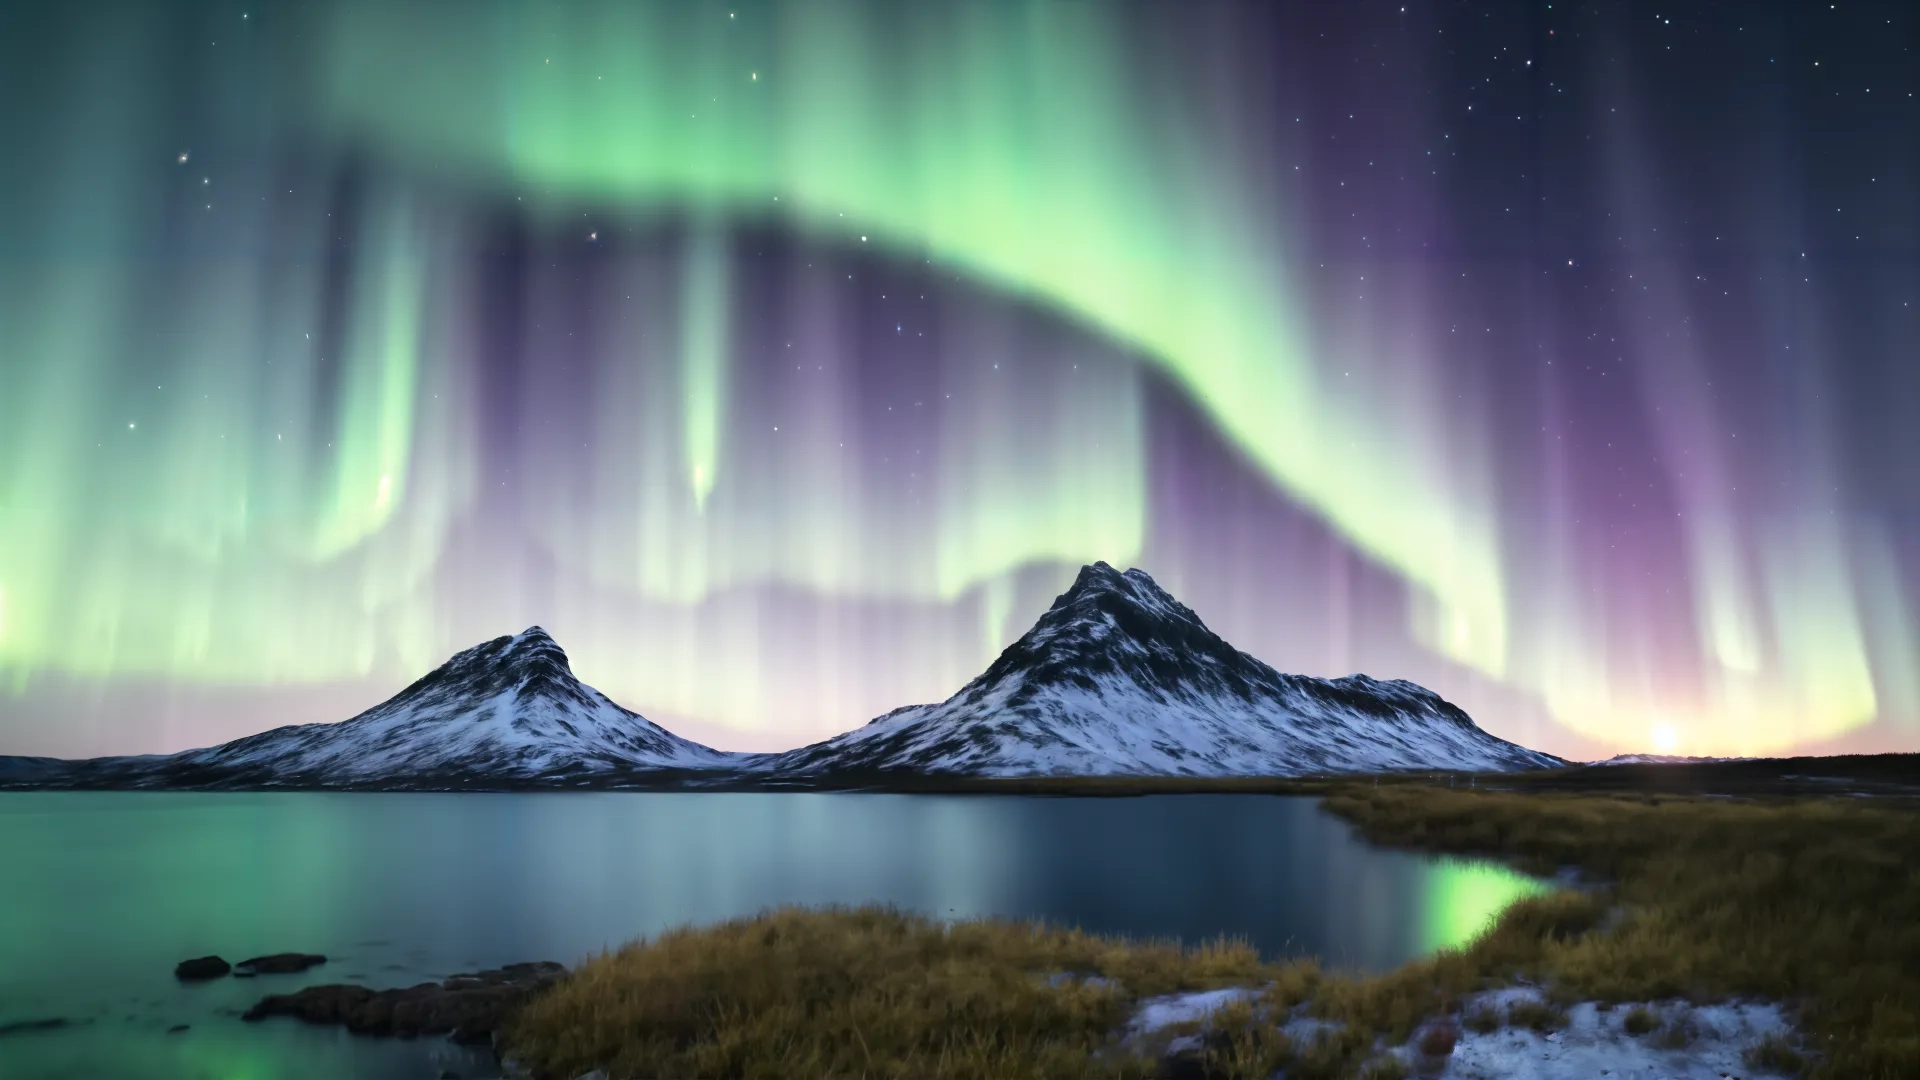 mountain in the middle of the night with aurora lights lite above it and a body of water under it on a plain with an almost bare, green grass area of land
